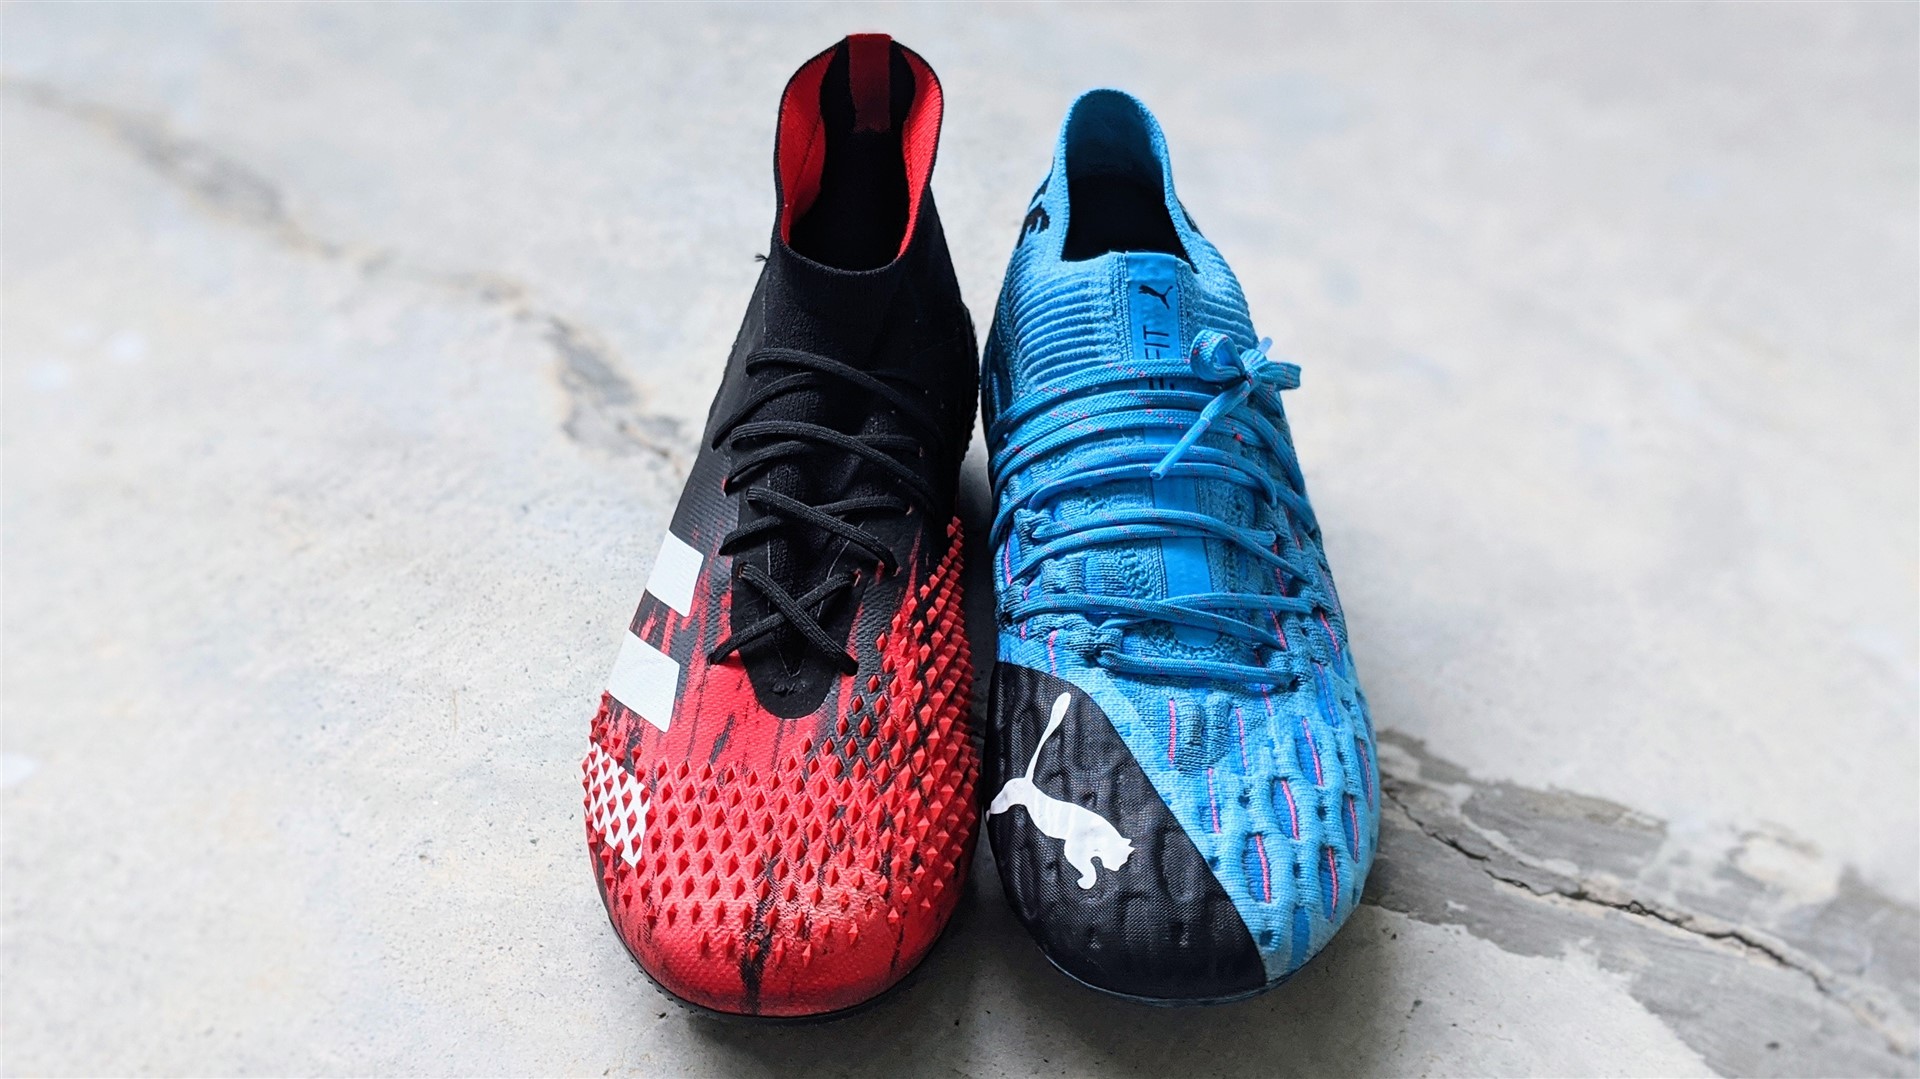 adidas touch football boots